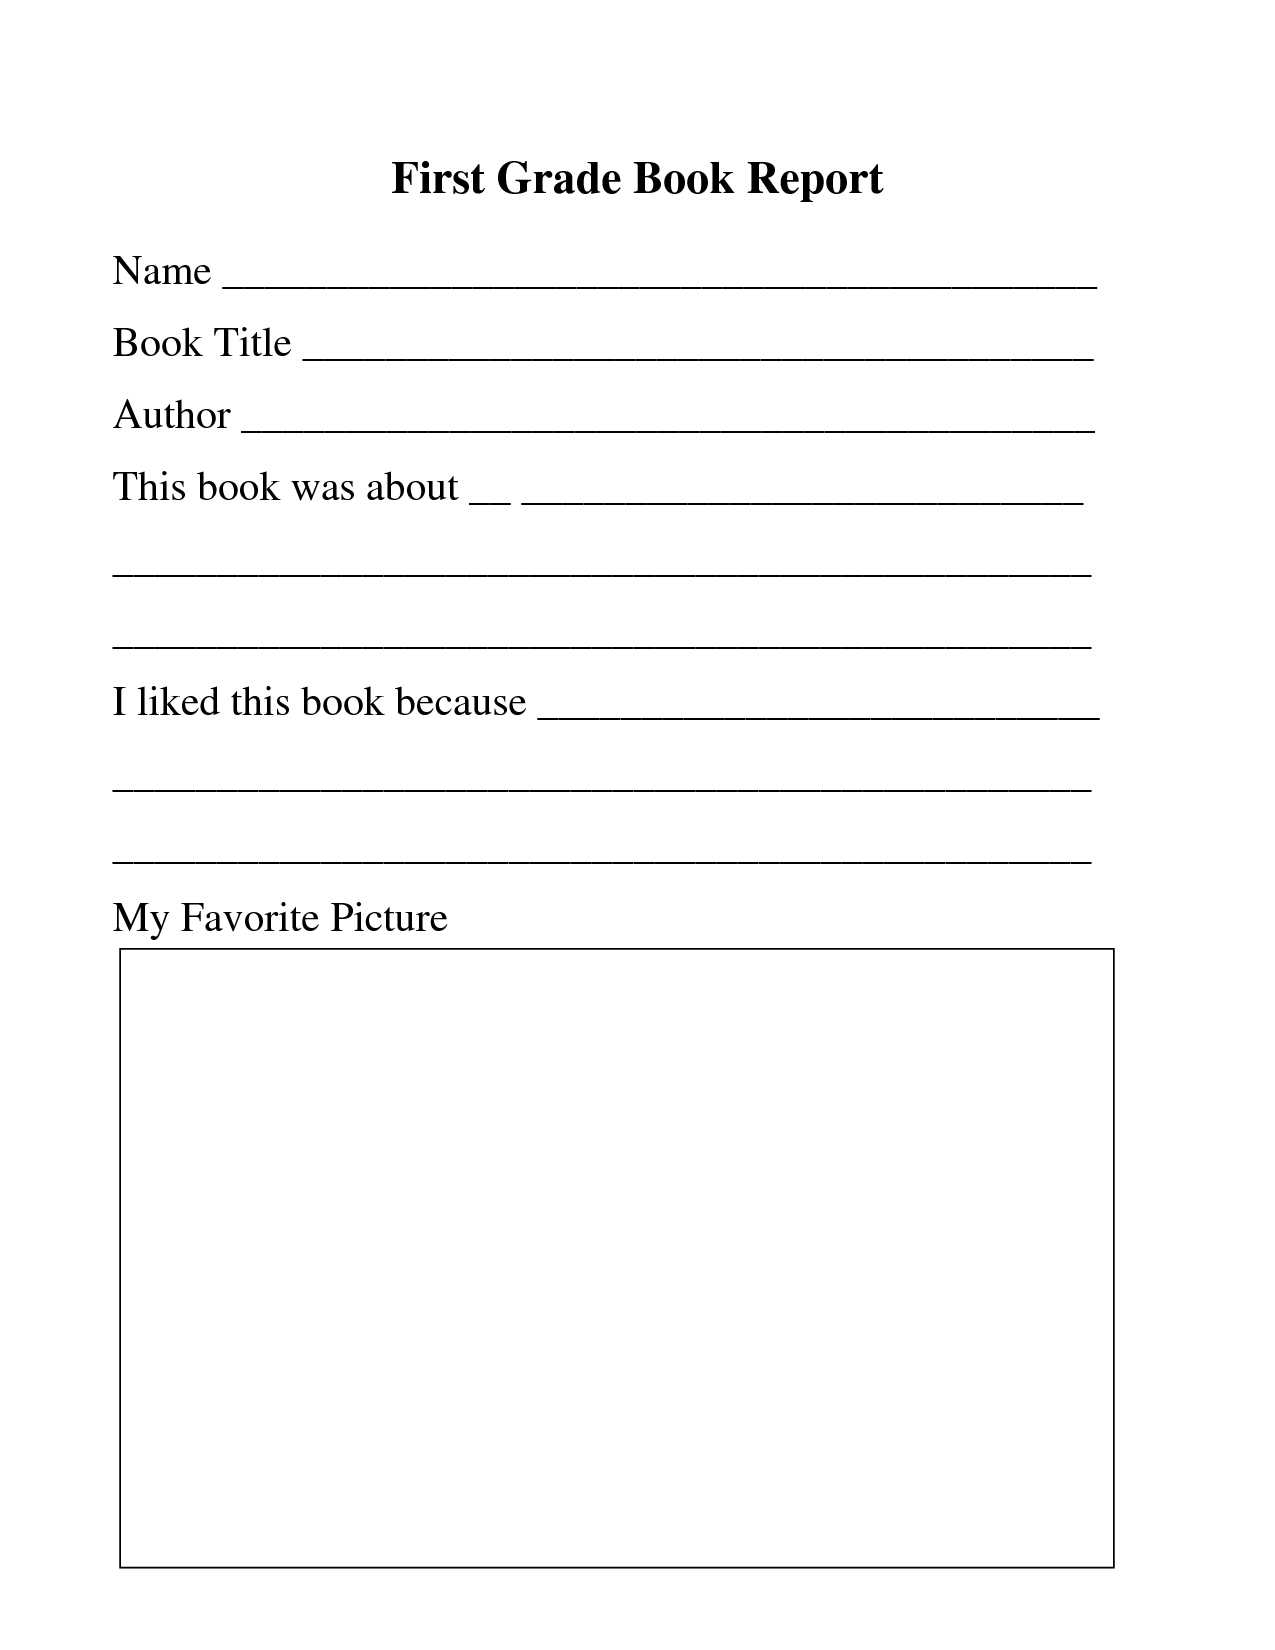 28 Images Of Template For First Grade List | Masorler For 1St Grade Book Report Template